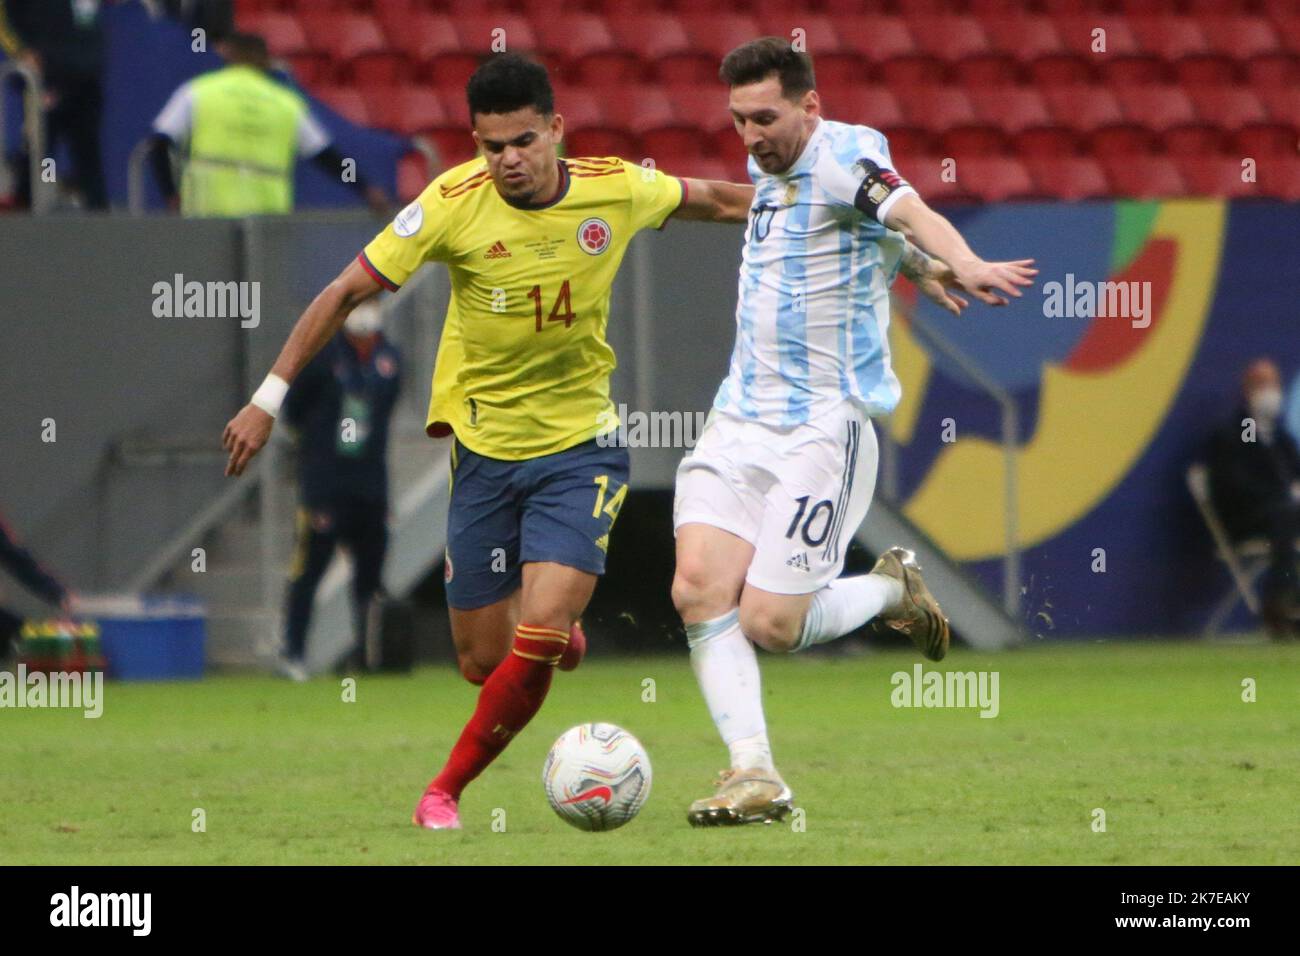 ©Laurent Lairys/MAXPPP - Lionel Messi of Argentina and L Diaz of Colombia during the Copa America 2021, semi-final football match between Argentina and Colombia on July 6, 2021 at Estádio Nacional Mané Garrincha in Brasilia, Brazil photos Laurent Lairys / MAXPPP Stock Photo